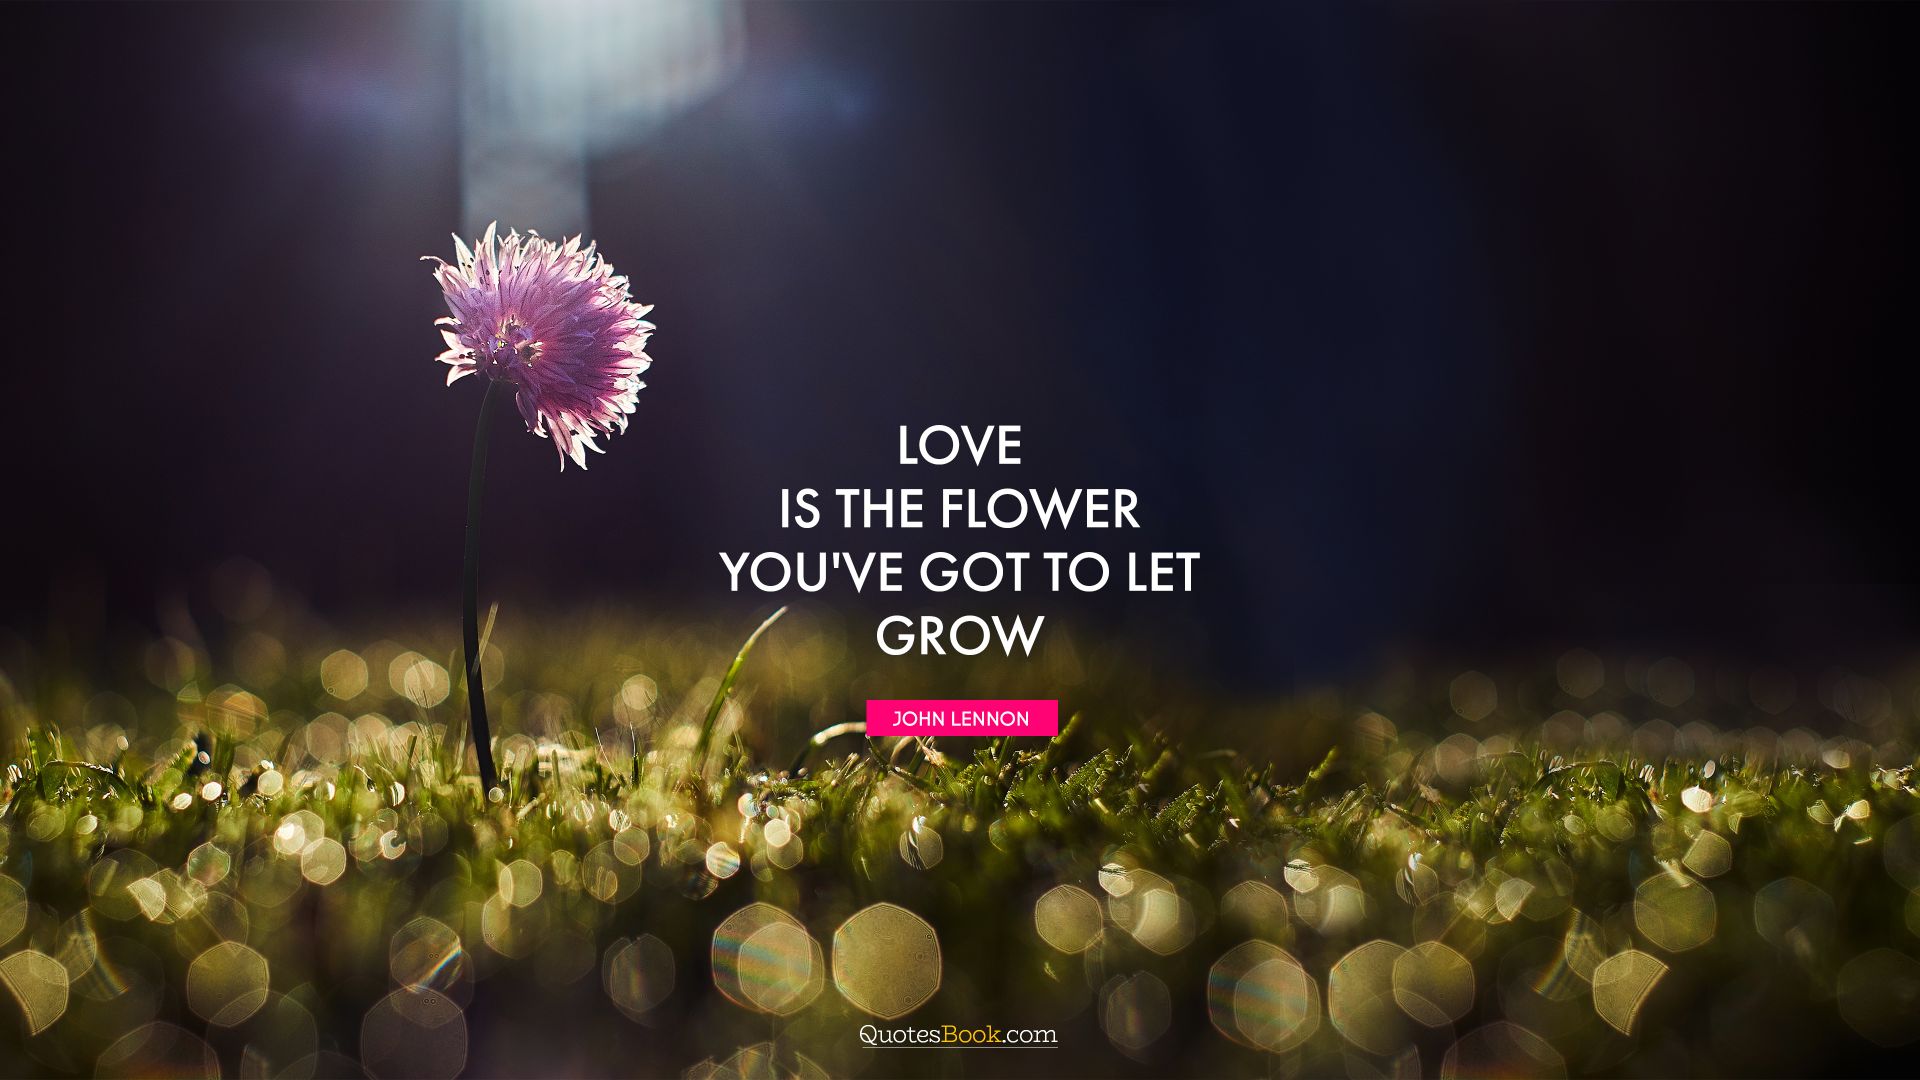 Love is the flower you've got to let grow. - Quote by John Lennon